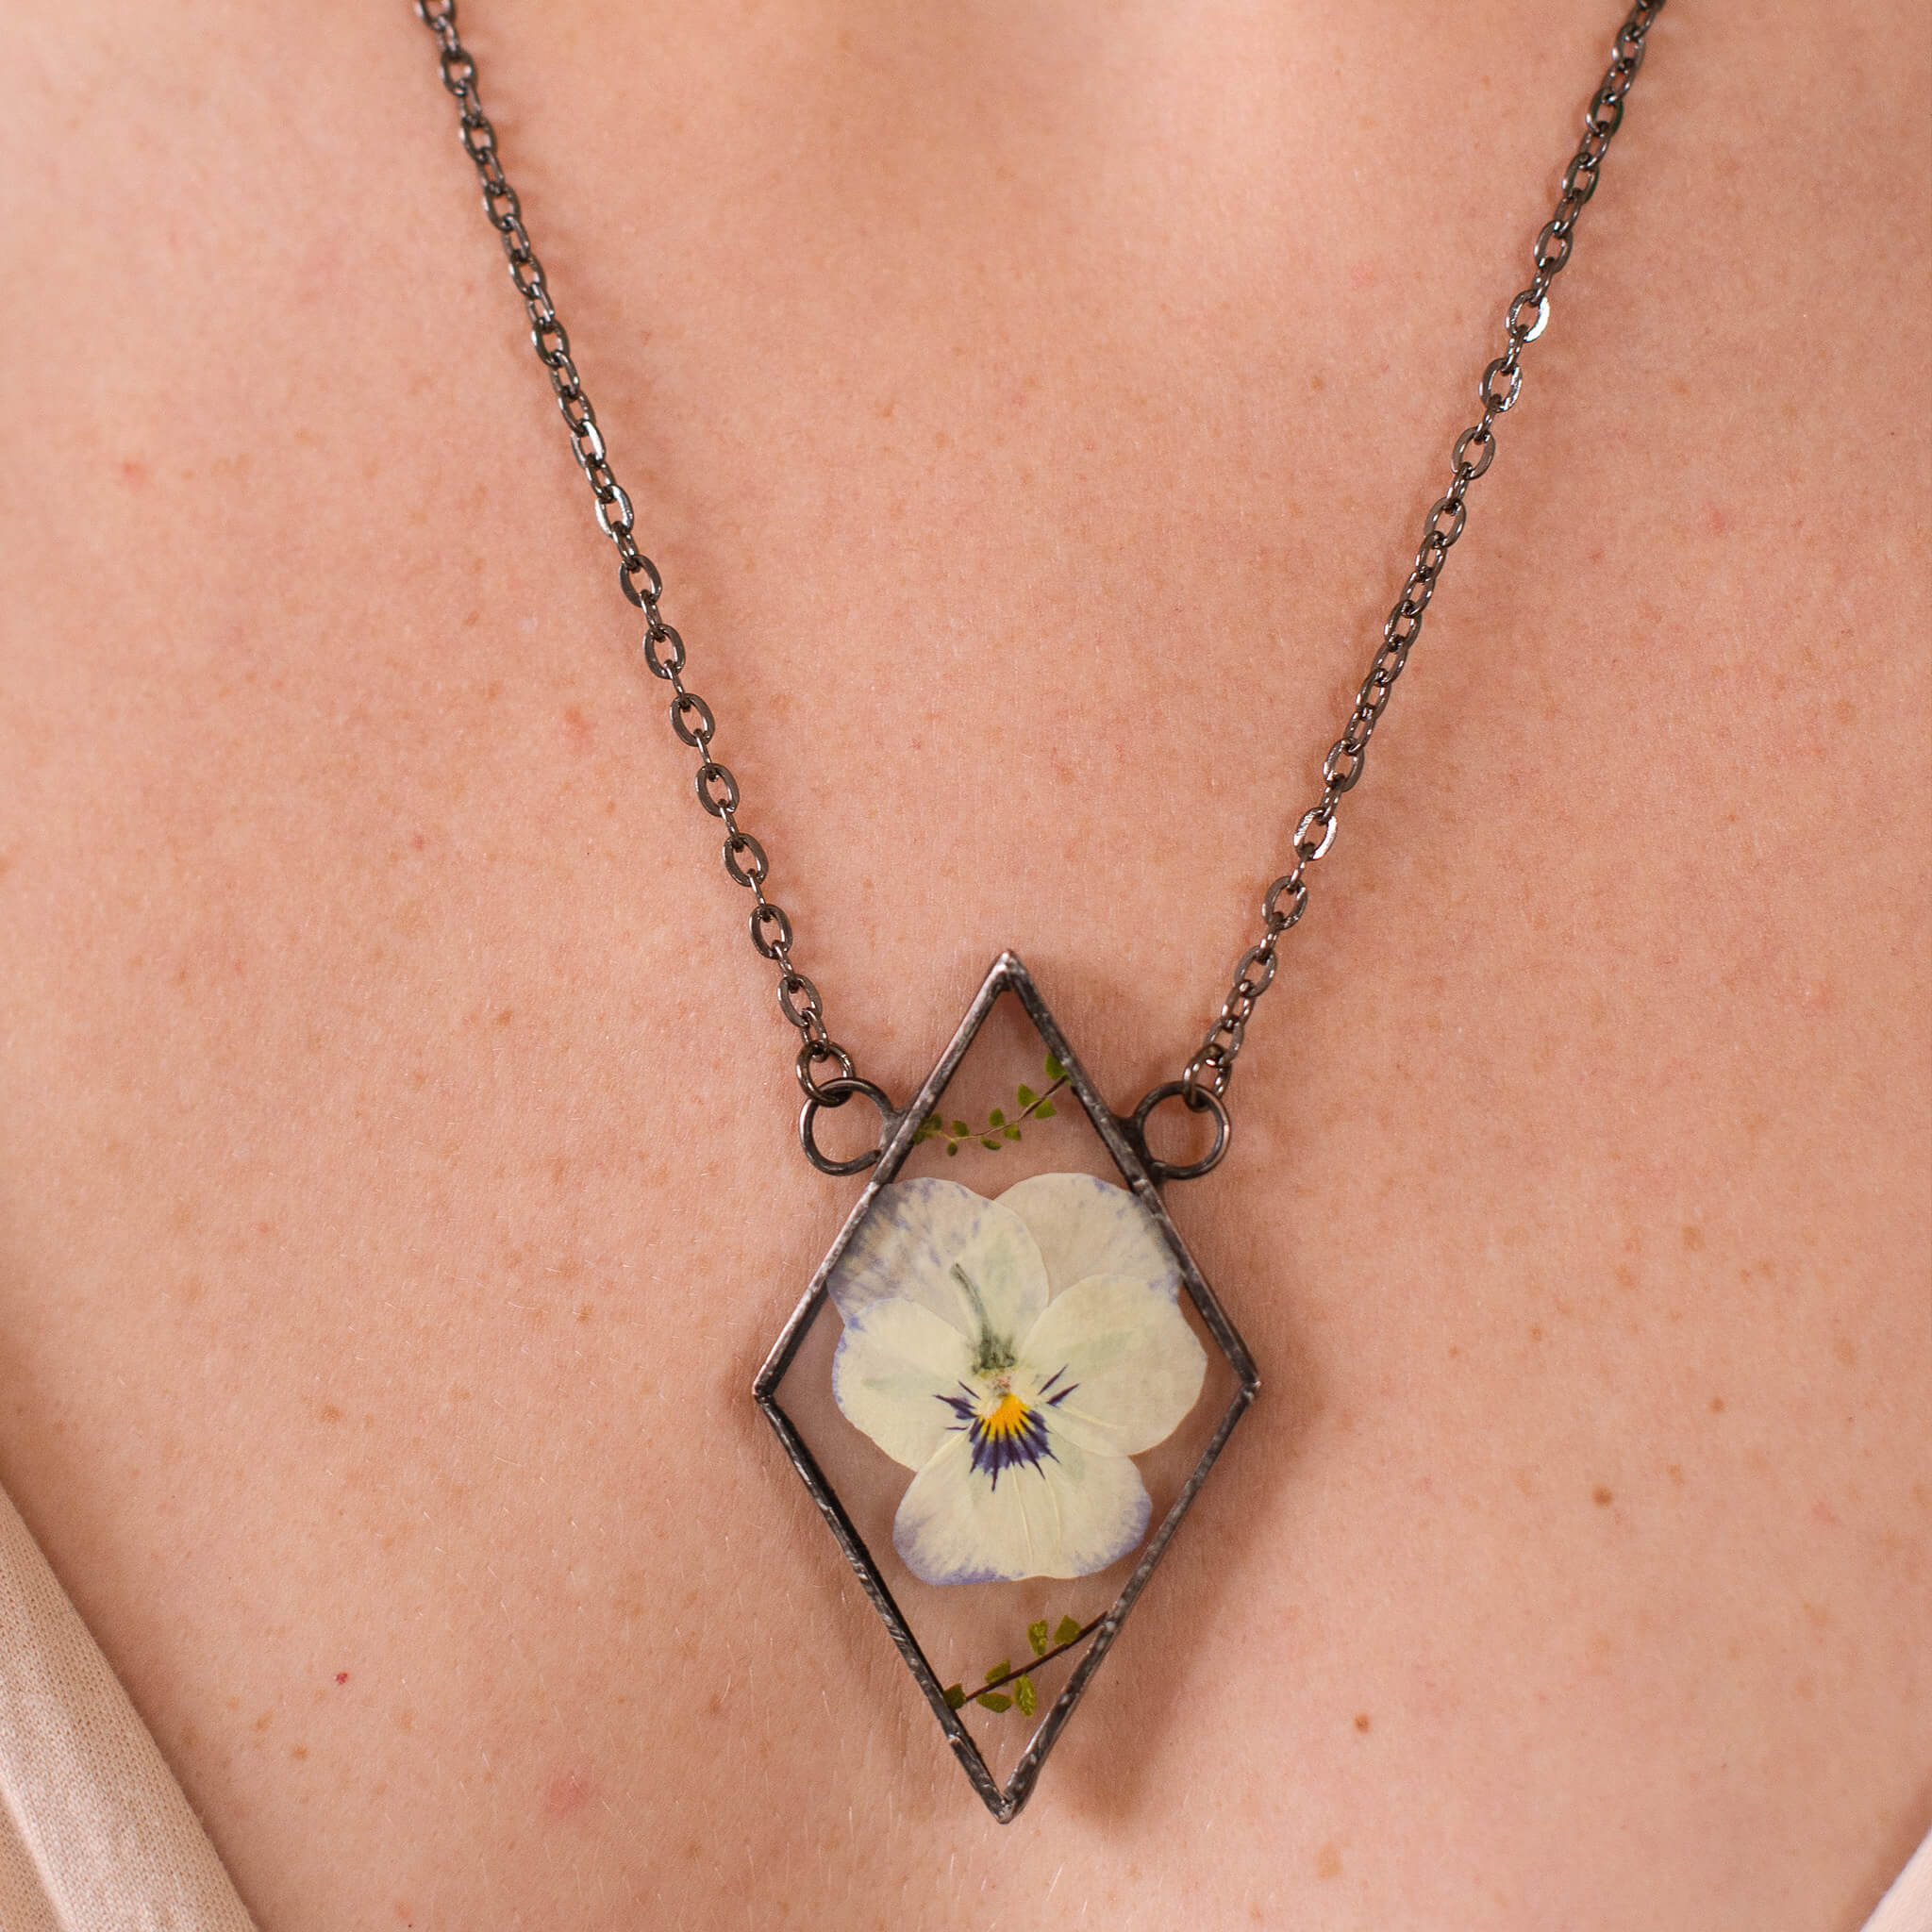 Pansy necklace worn on a cleavage